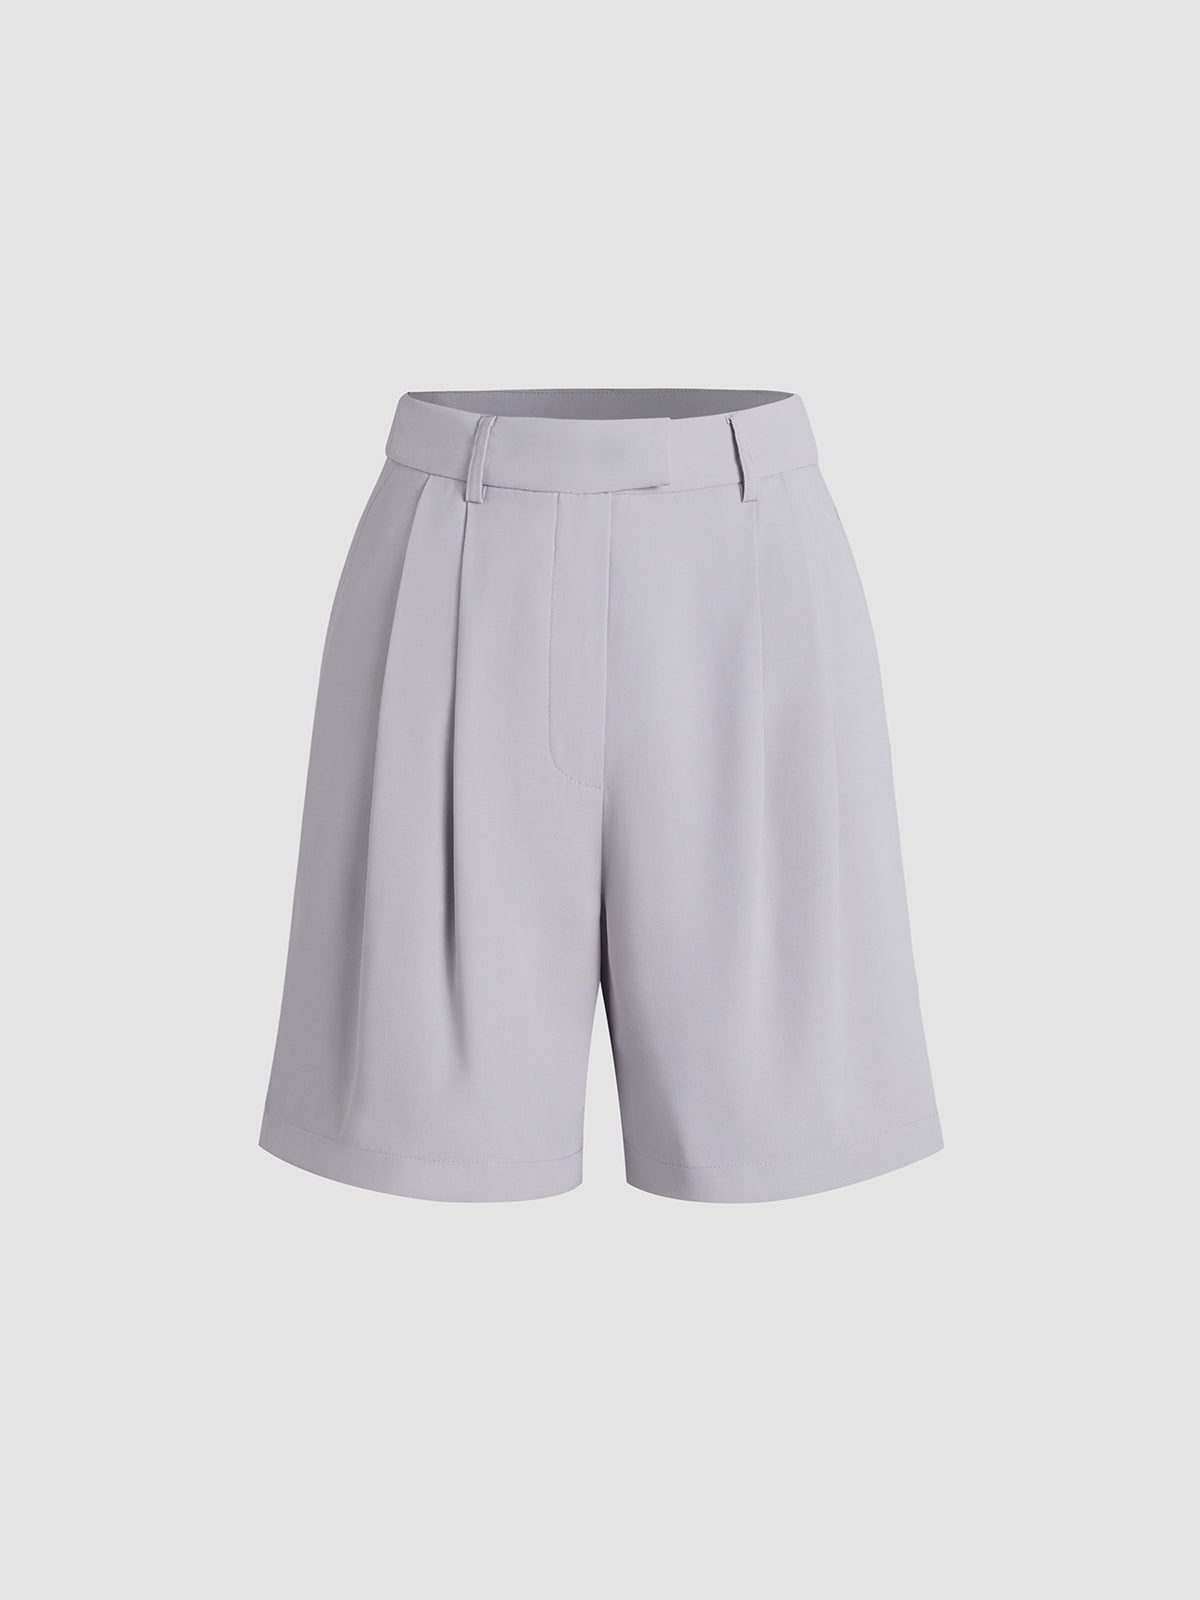 High Waisted Mid Thigh Trouser Shorts